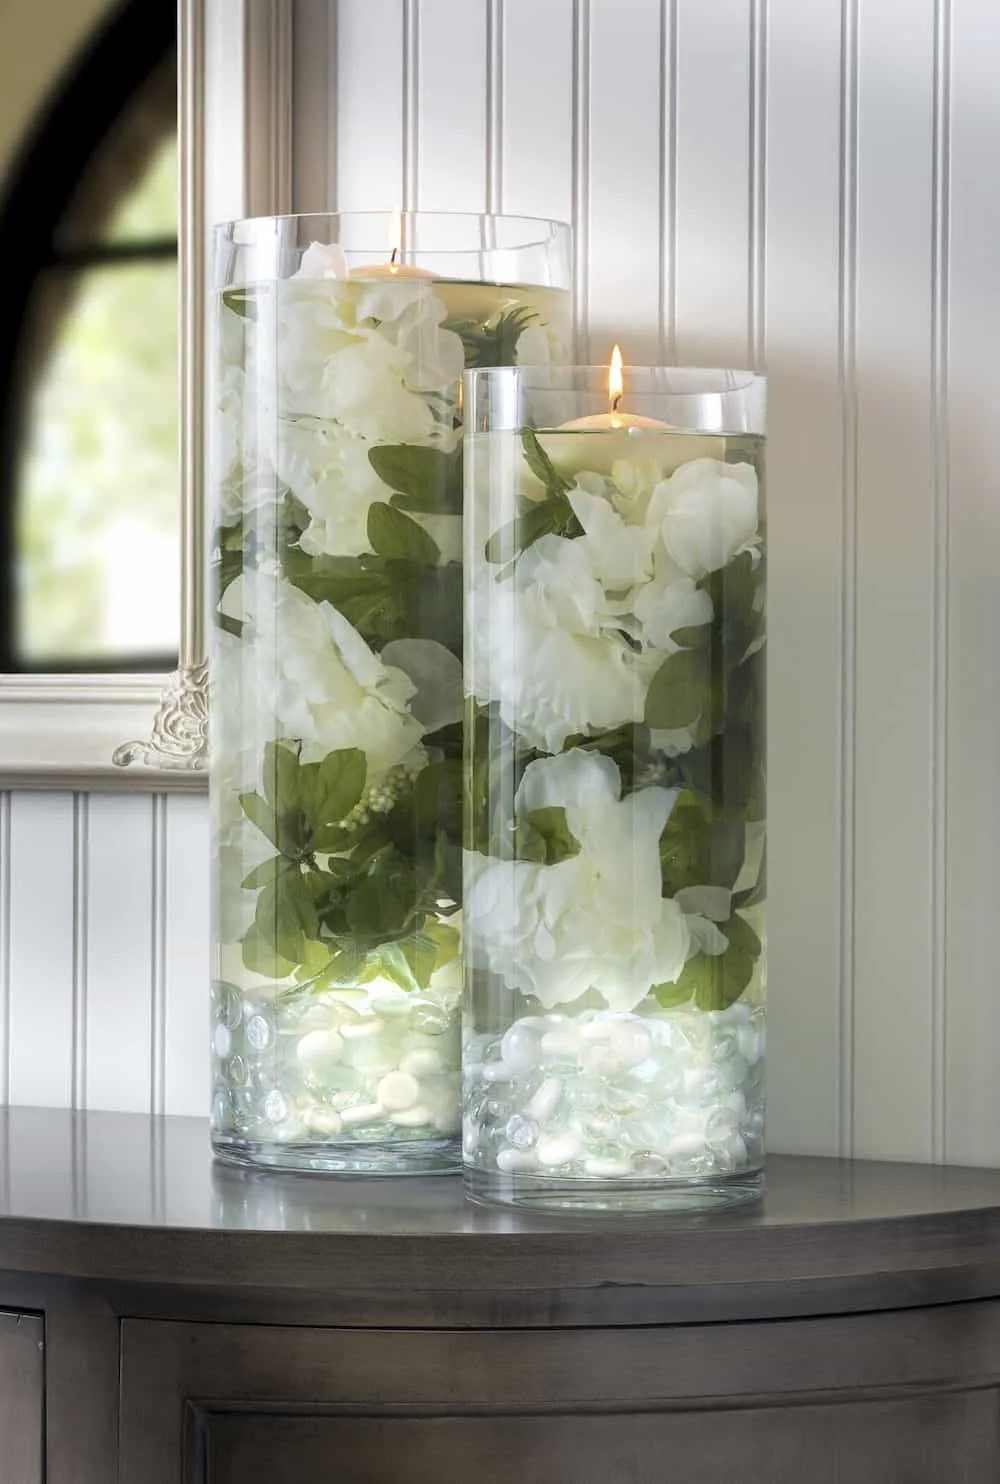 You can create these beautiful DIY wedding centerpieces in just a few steps. The submersible lights and flowers make them truly unique!